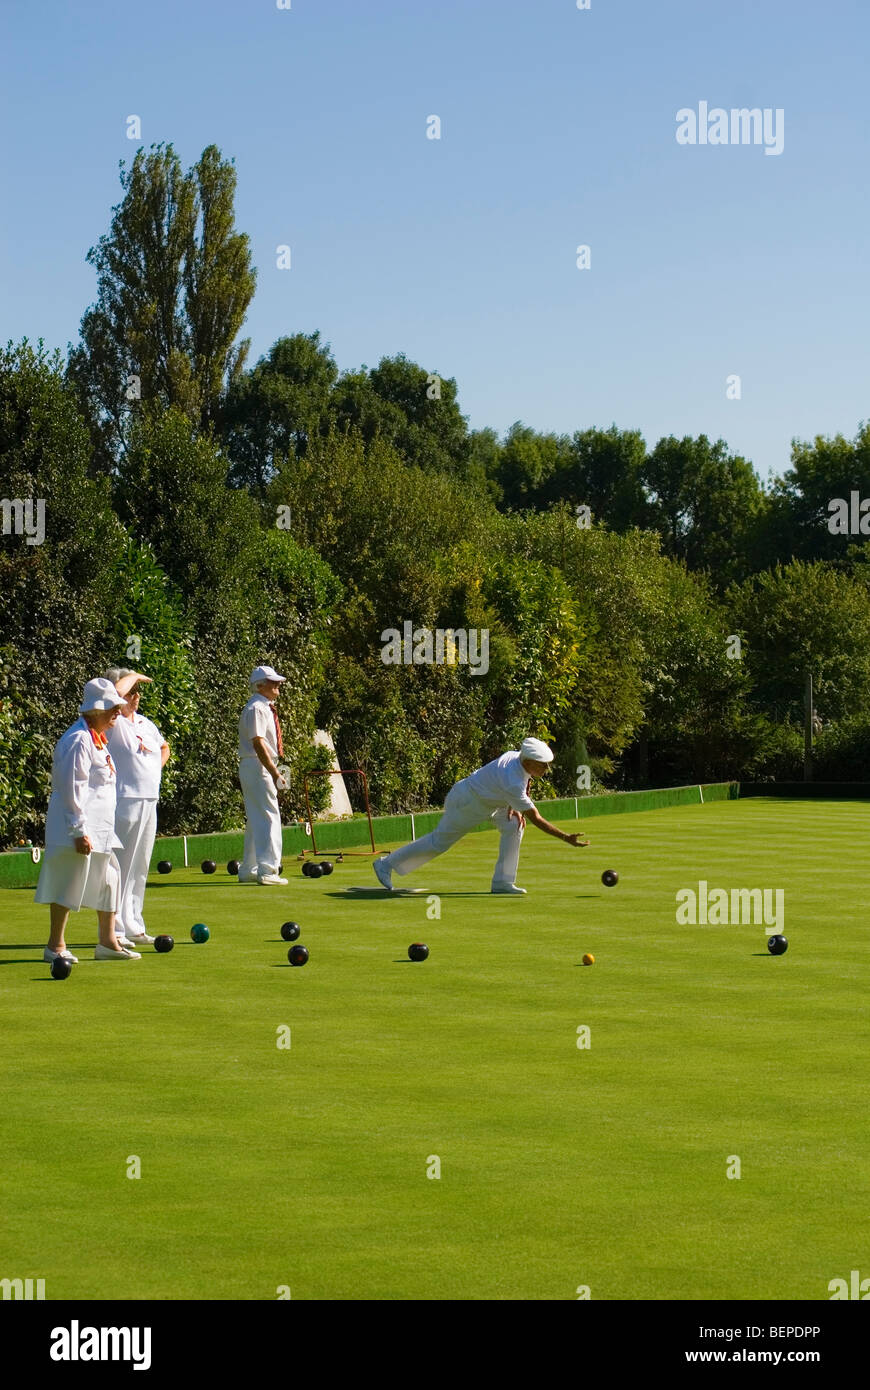 Members of the Avon Bowls Club bowling at the recreation ground Stratford-upon-Avon Stock Photo